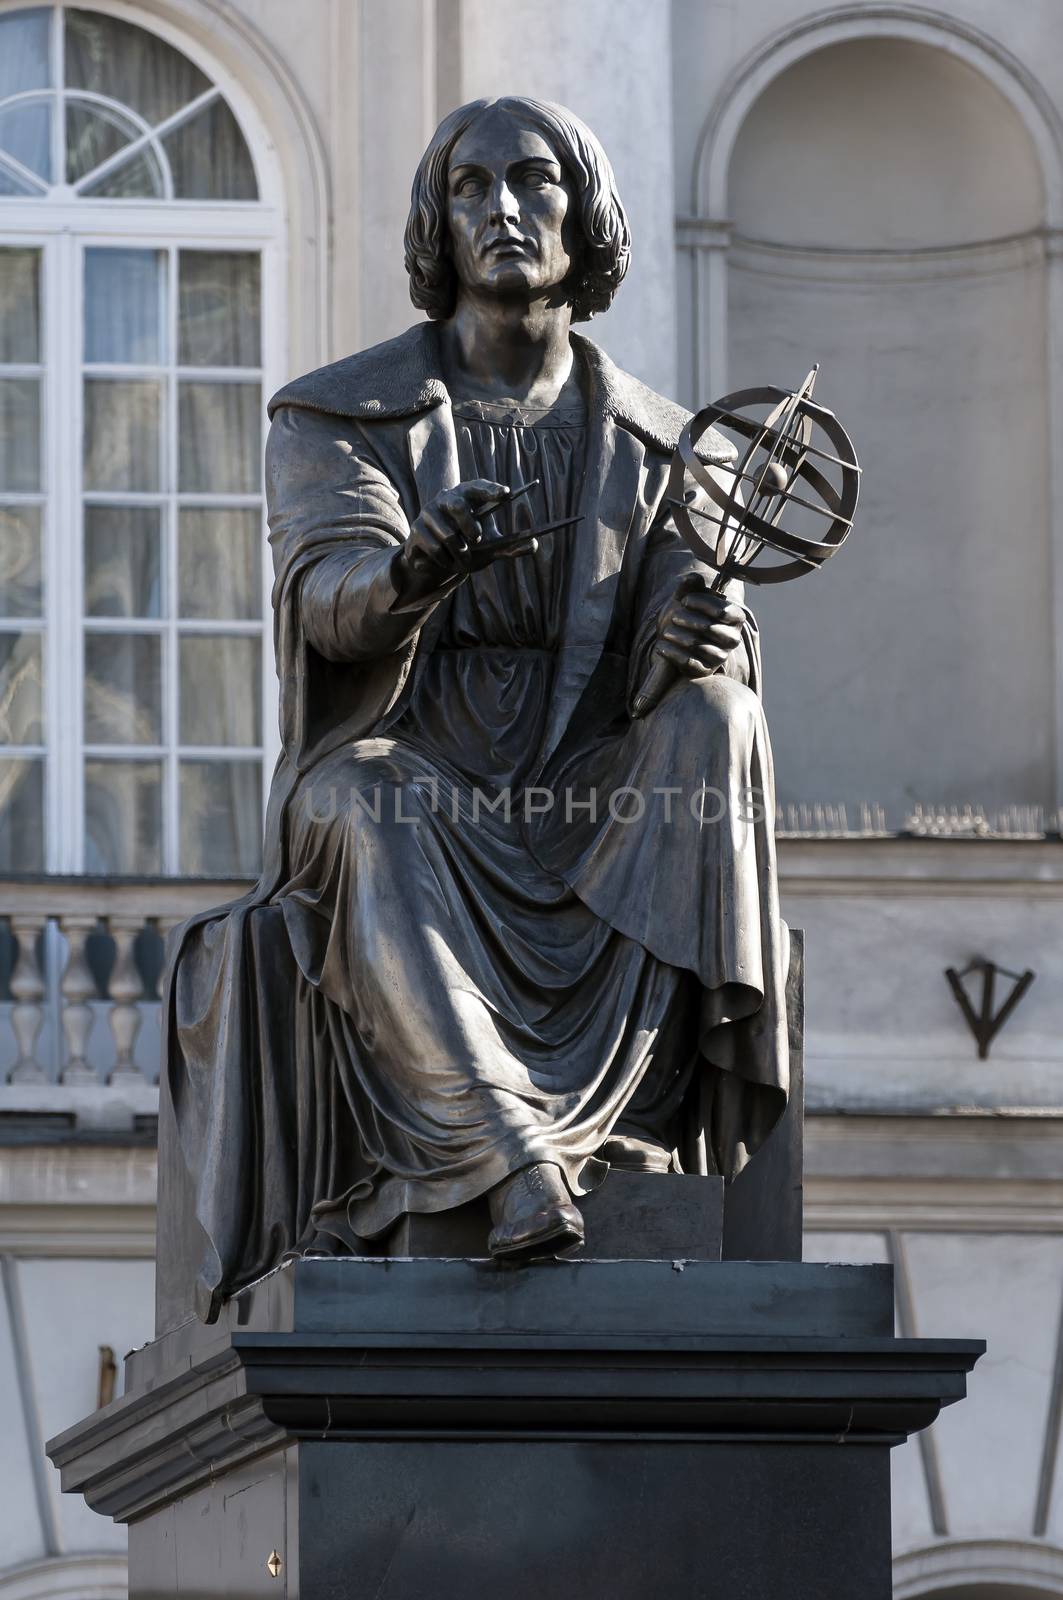 Nicolaus Copernicus. by FER737NG